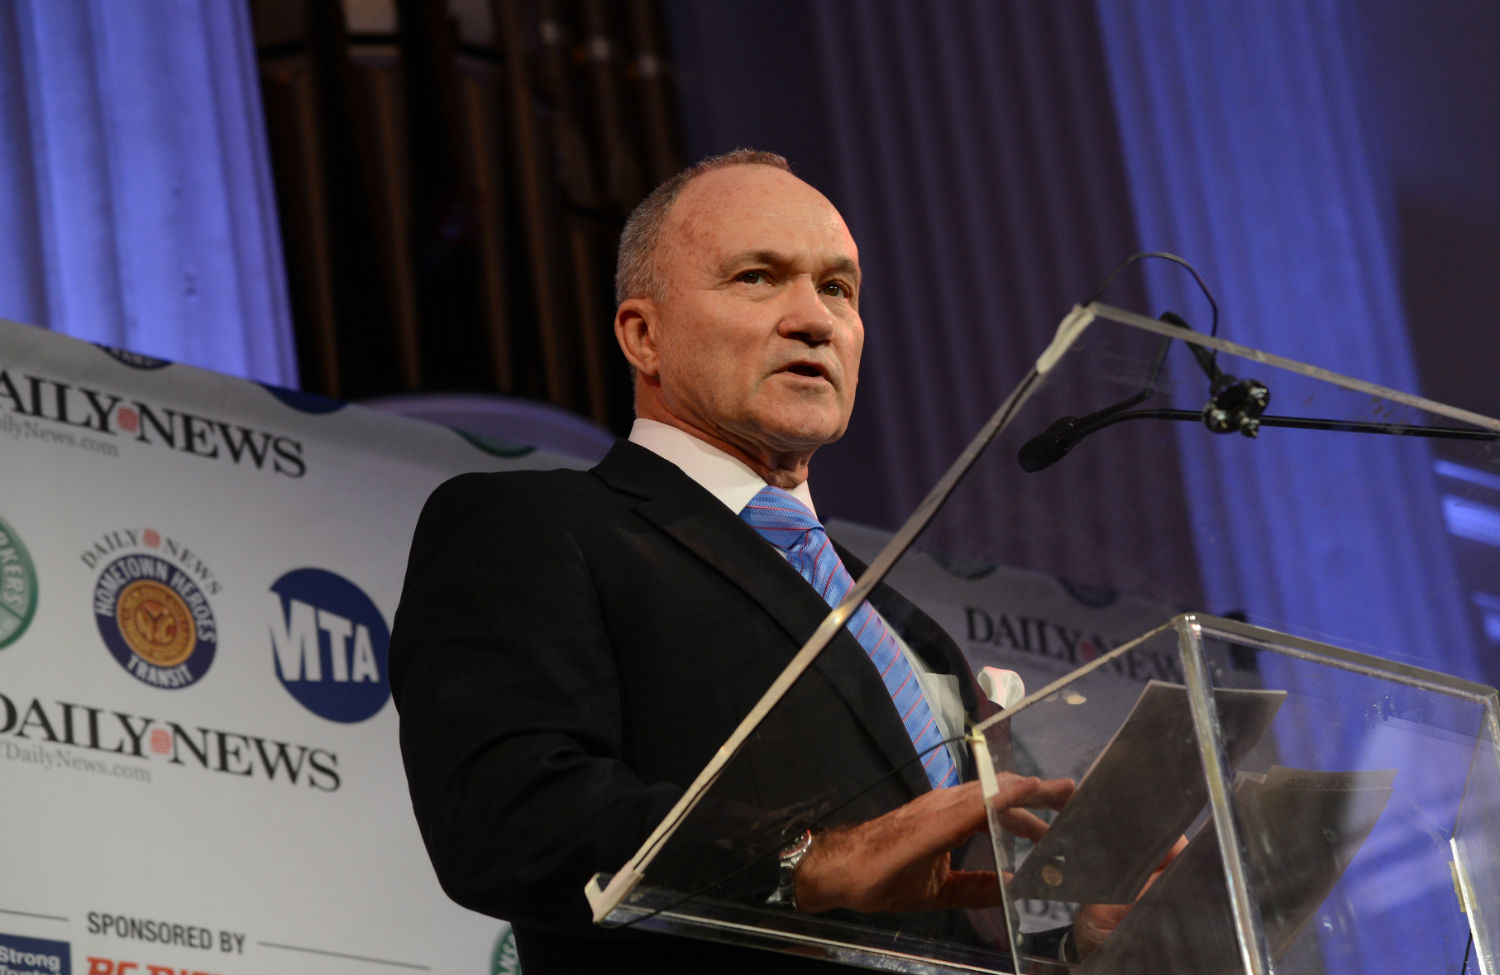 Brown University Booed Ray Kelly and Racism